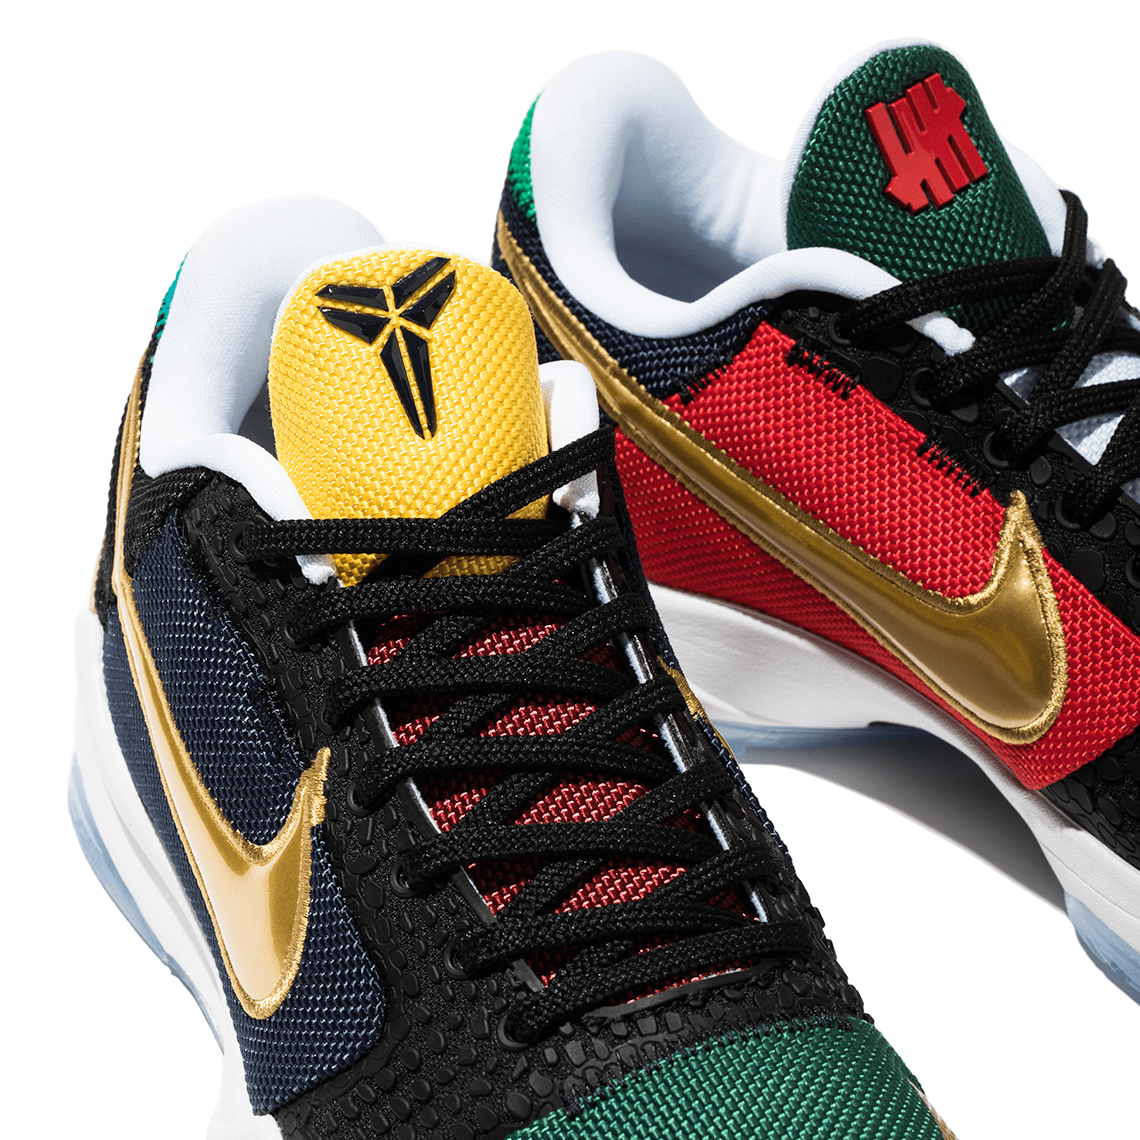 UNDEFEATED Nike Kobe 5 Protro Release Date | SneakerNews.com